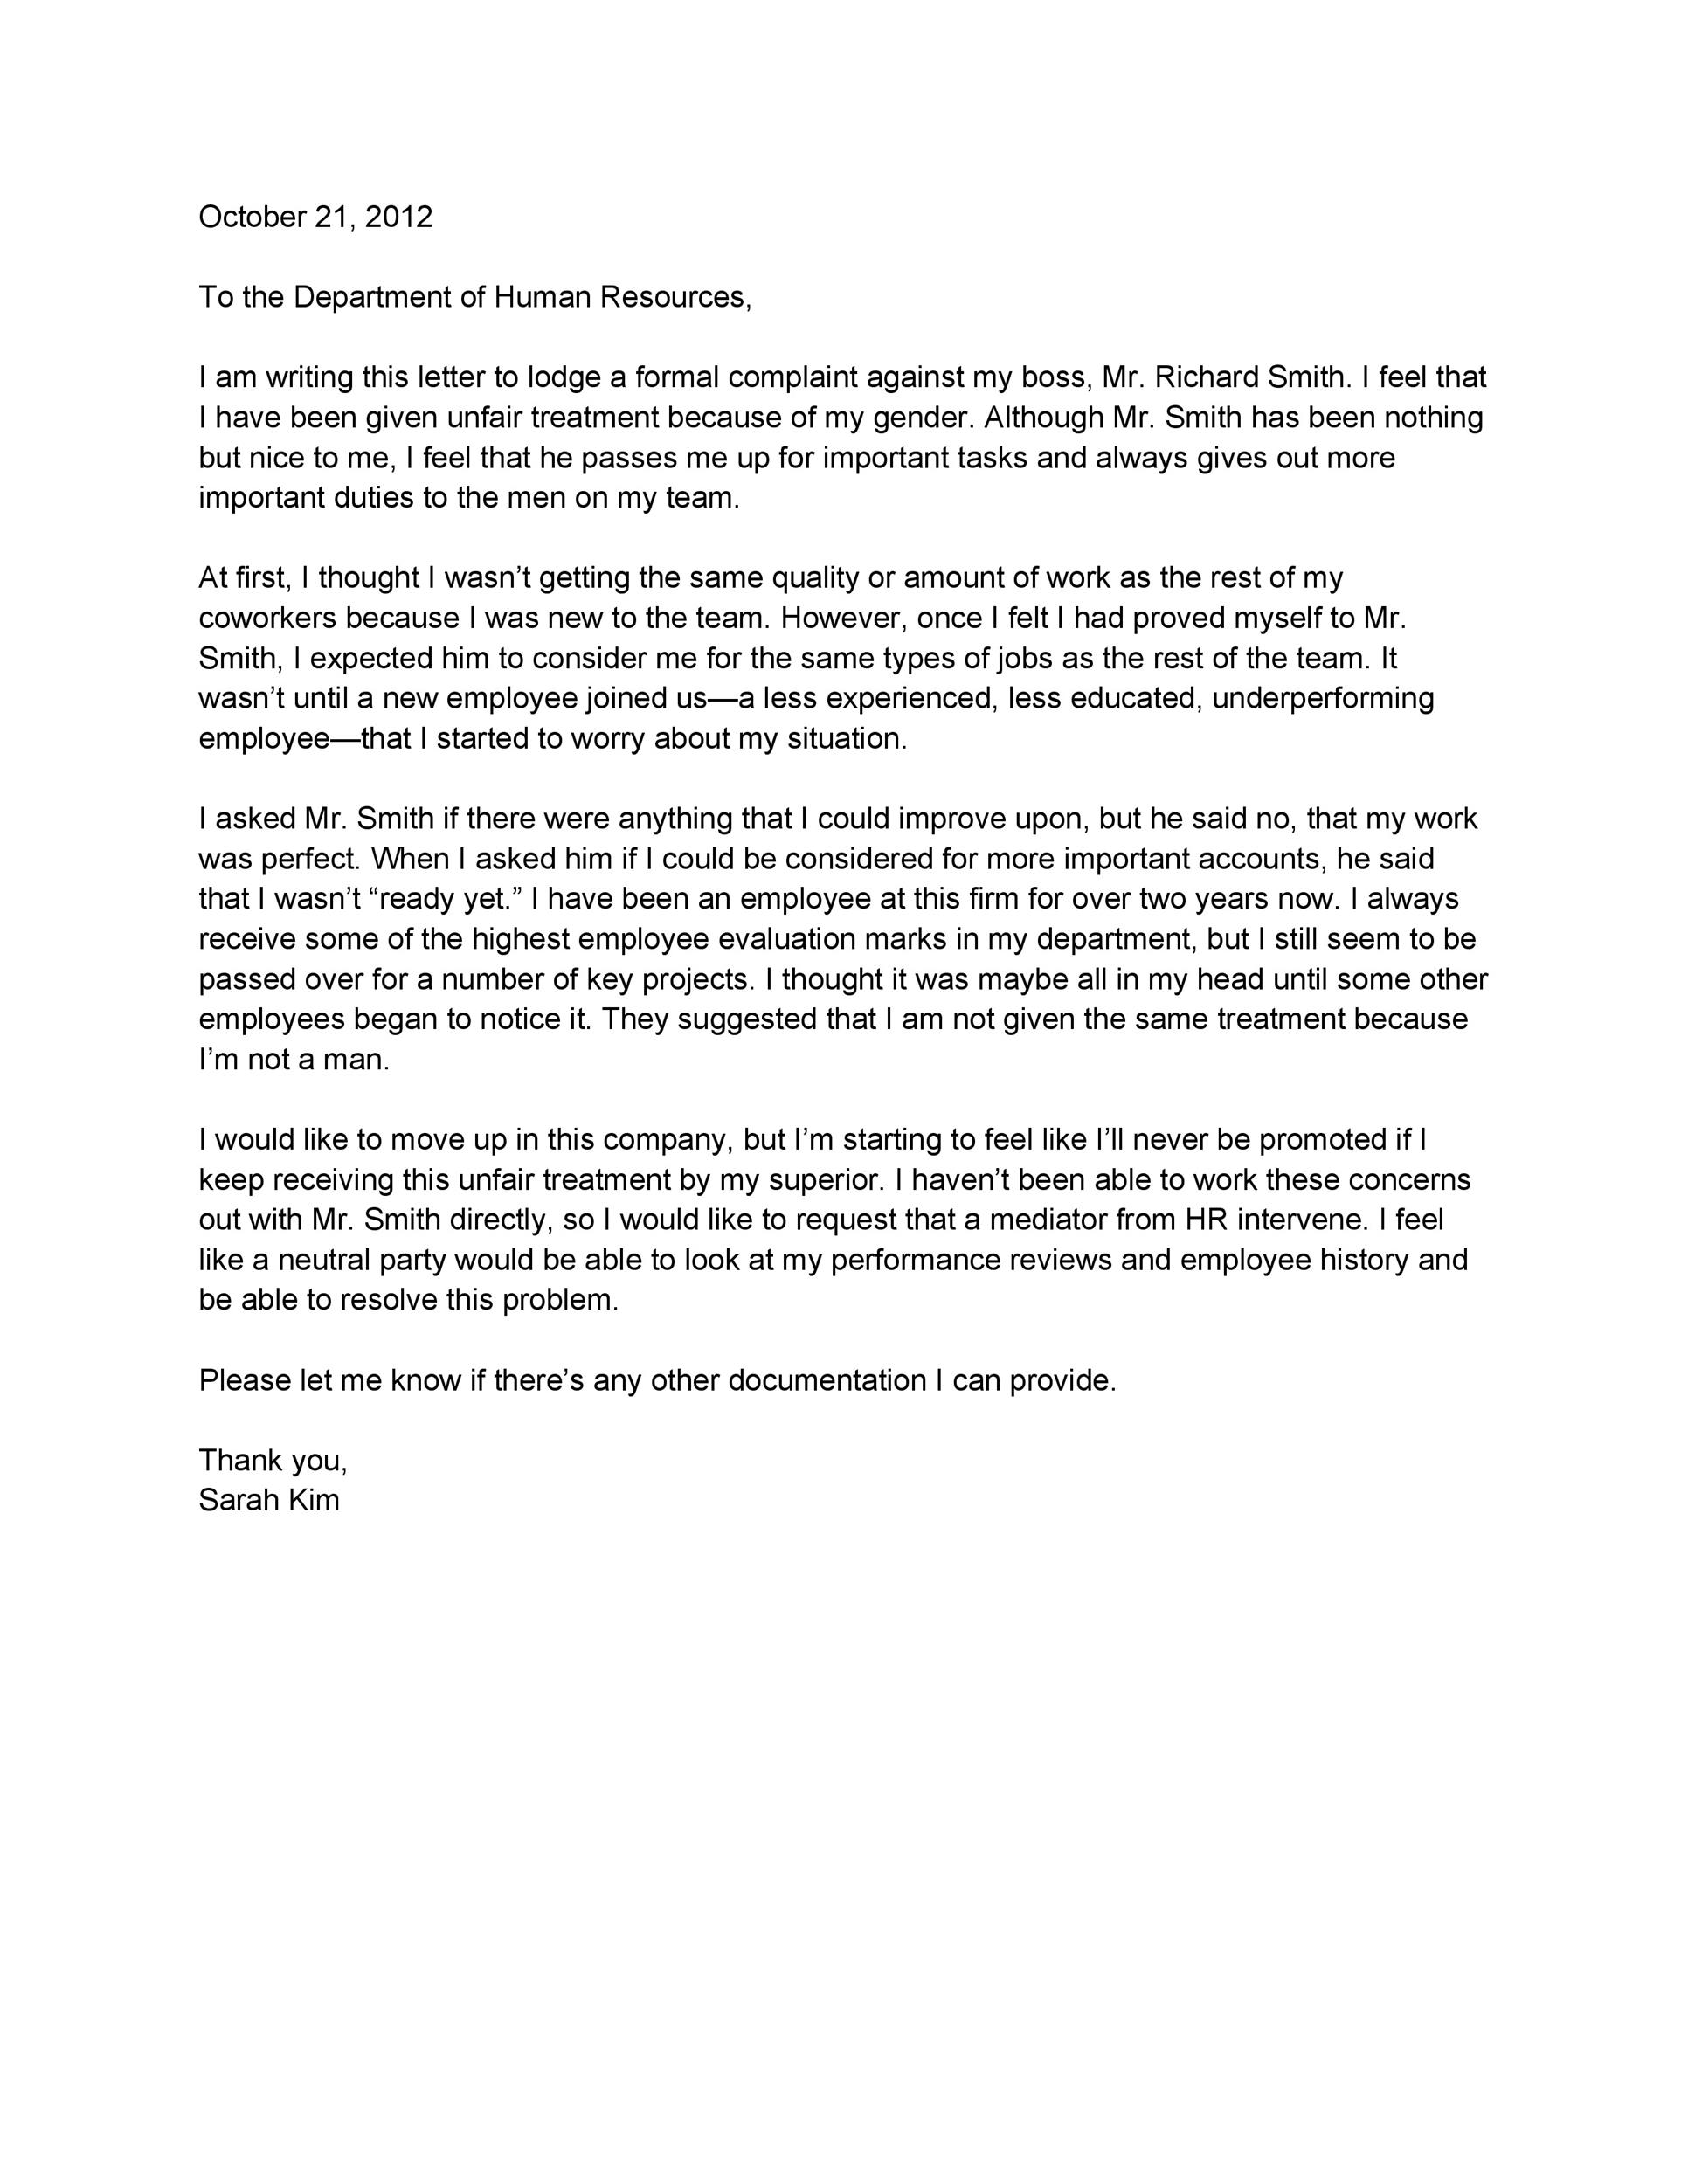 Formal Complaint Letter Sample On Co Worker from templatelab.com